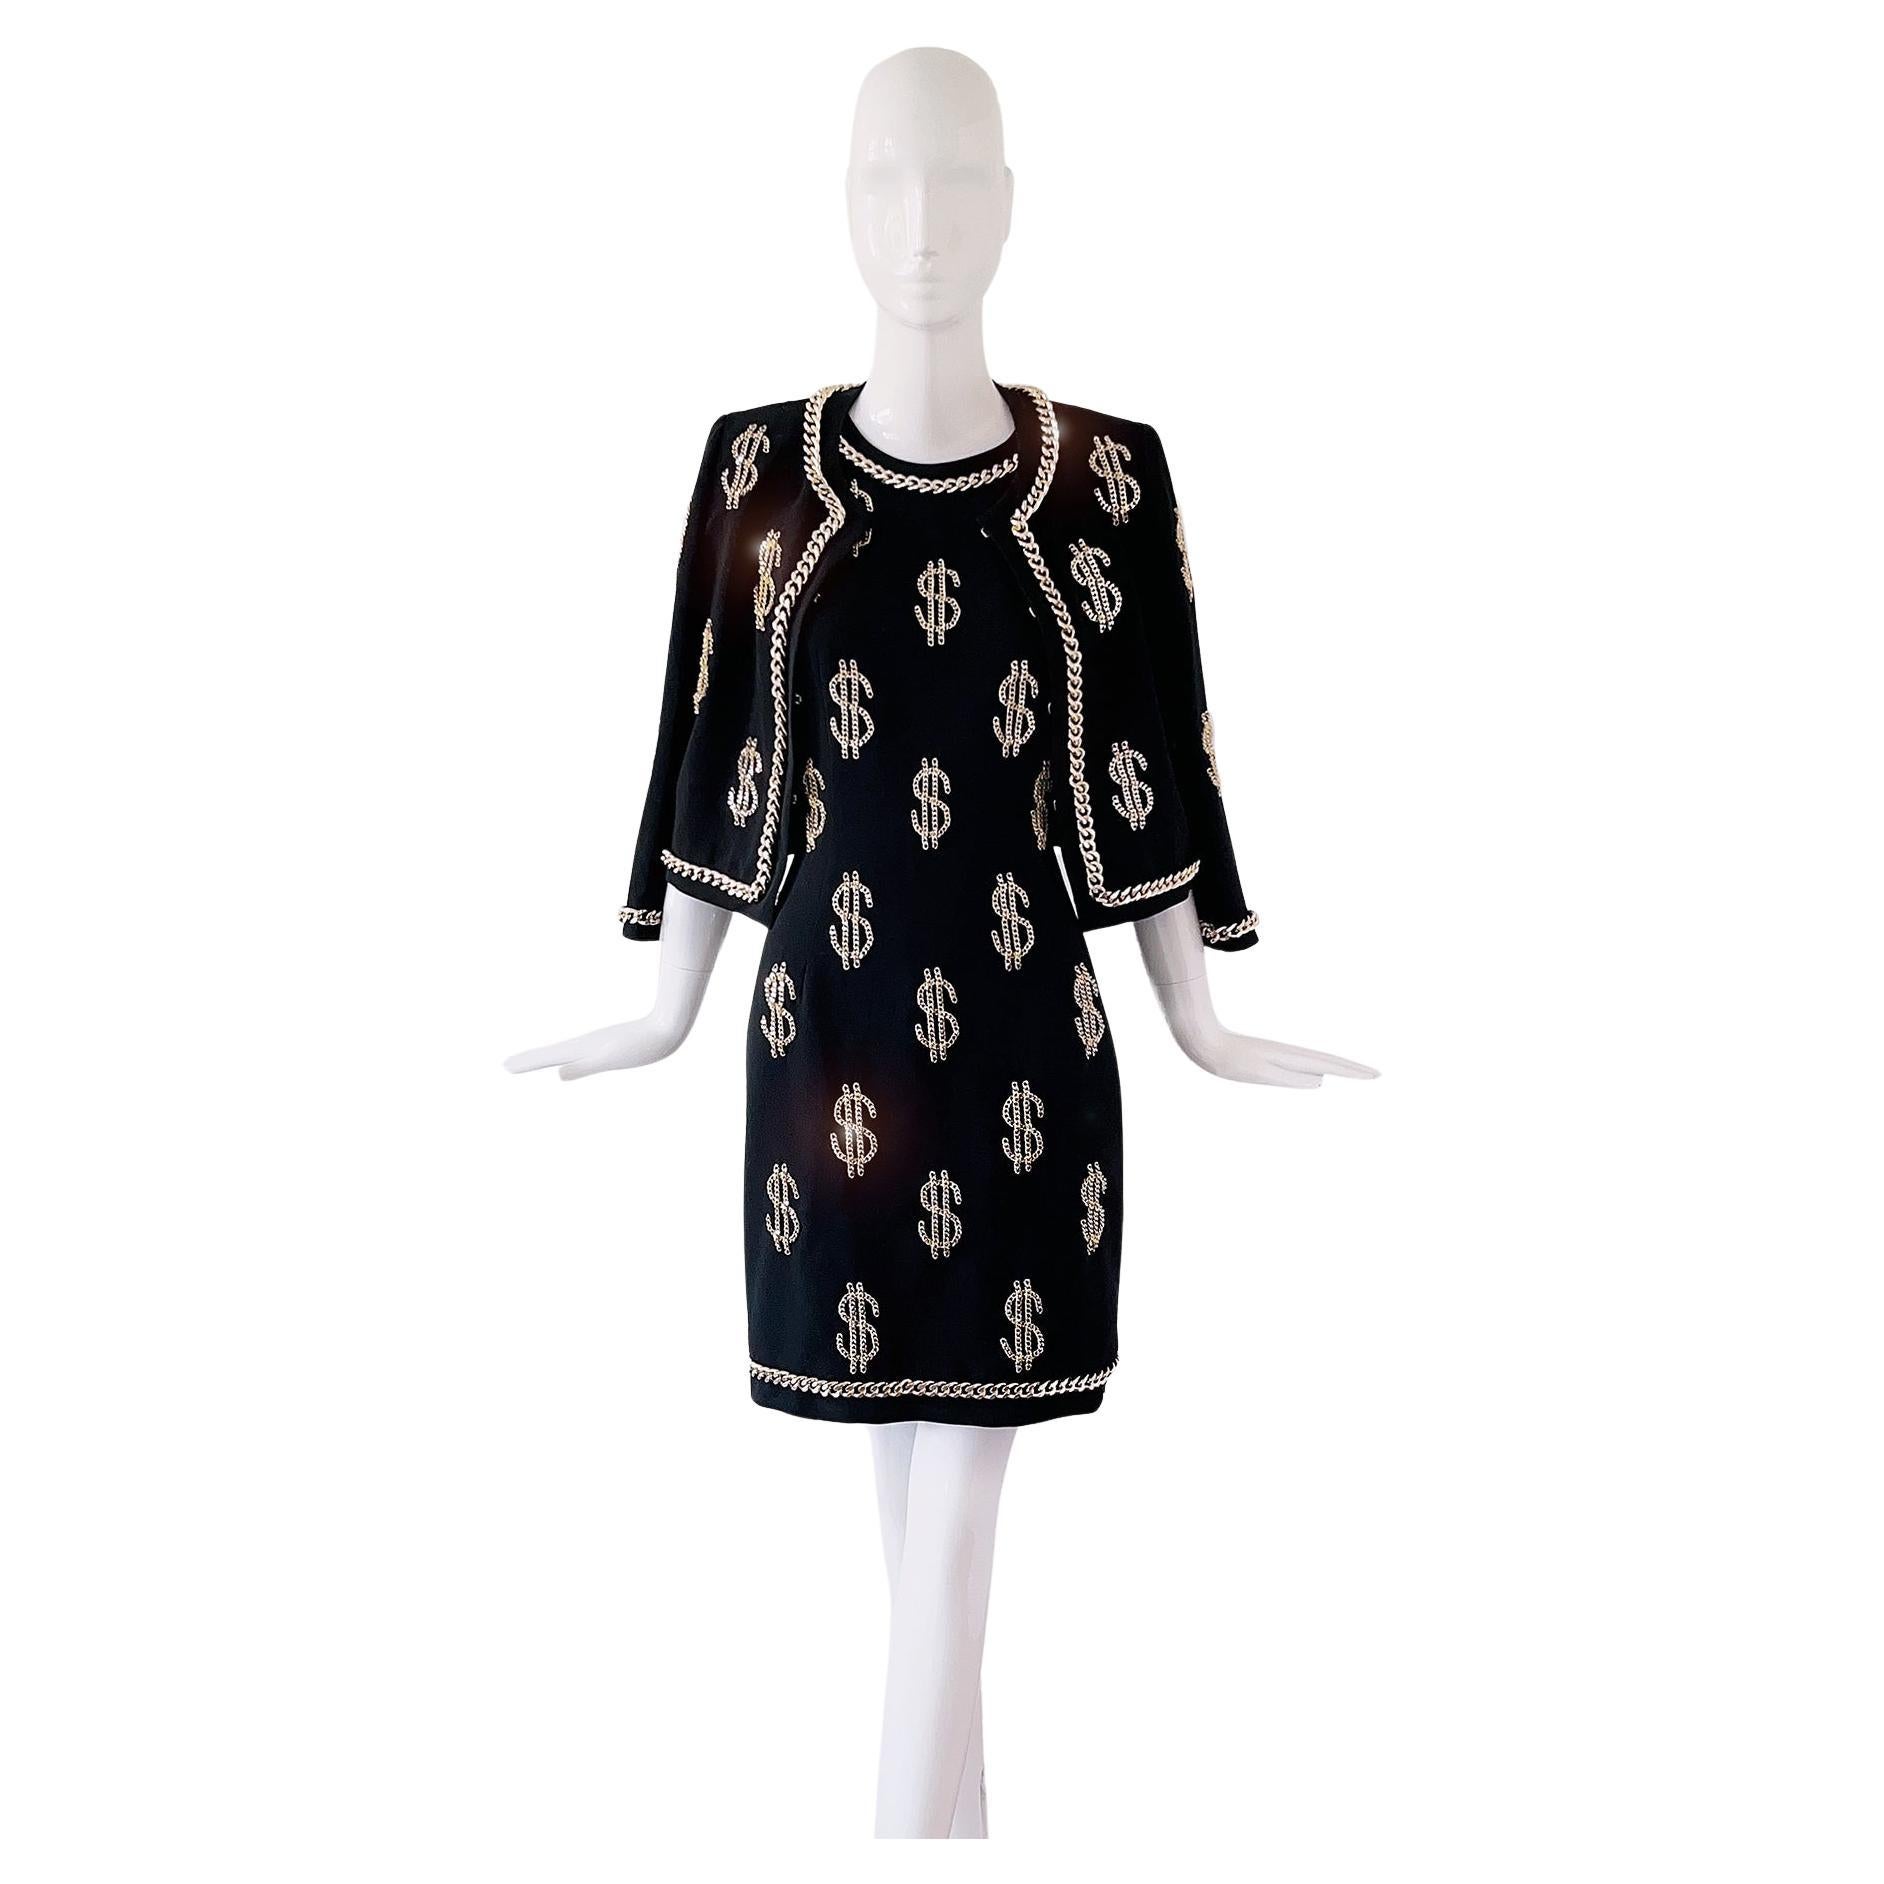 Iconique MOSCHINO Couture Dollar Sign Ensembe Black Dress Jacket Gold Chain Set  en vente